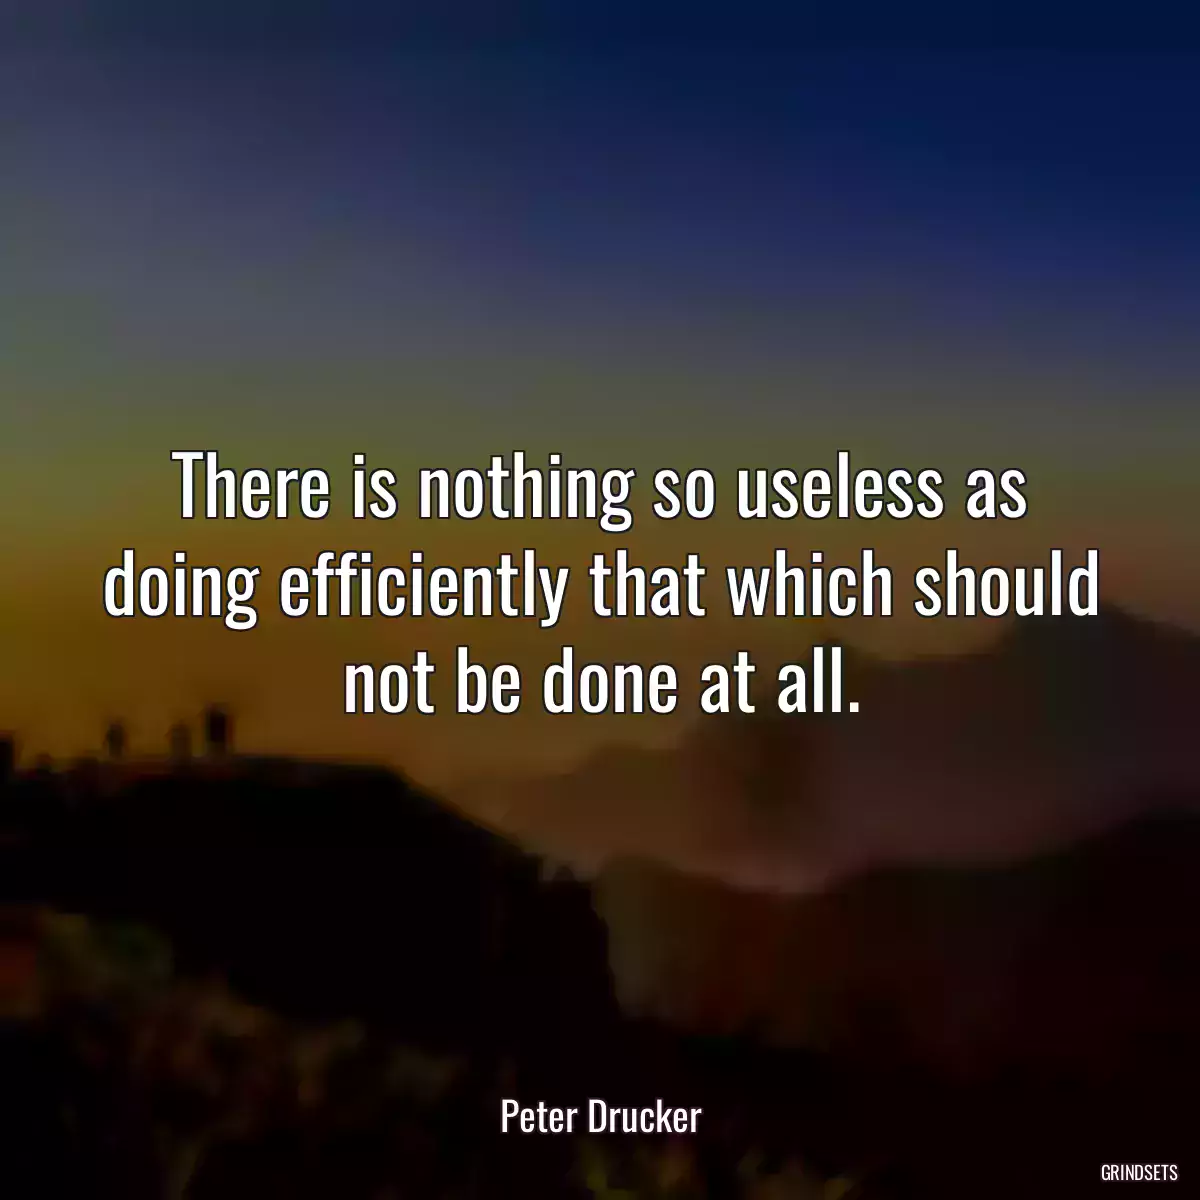 There is nothing so useless as doing efficiently that which should not be done at all.